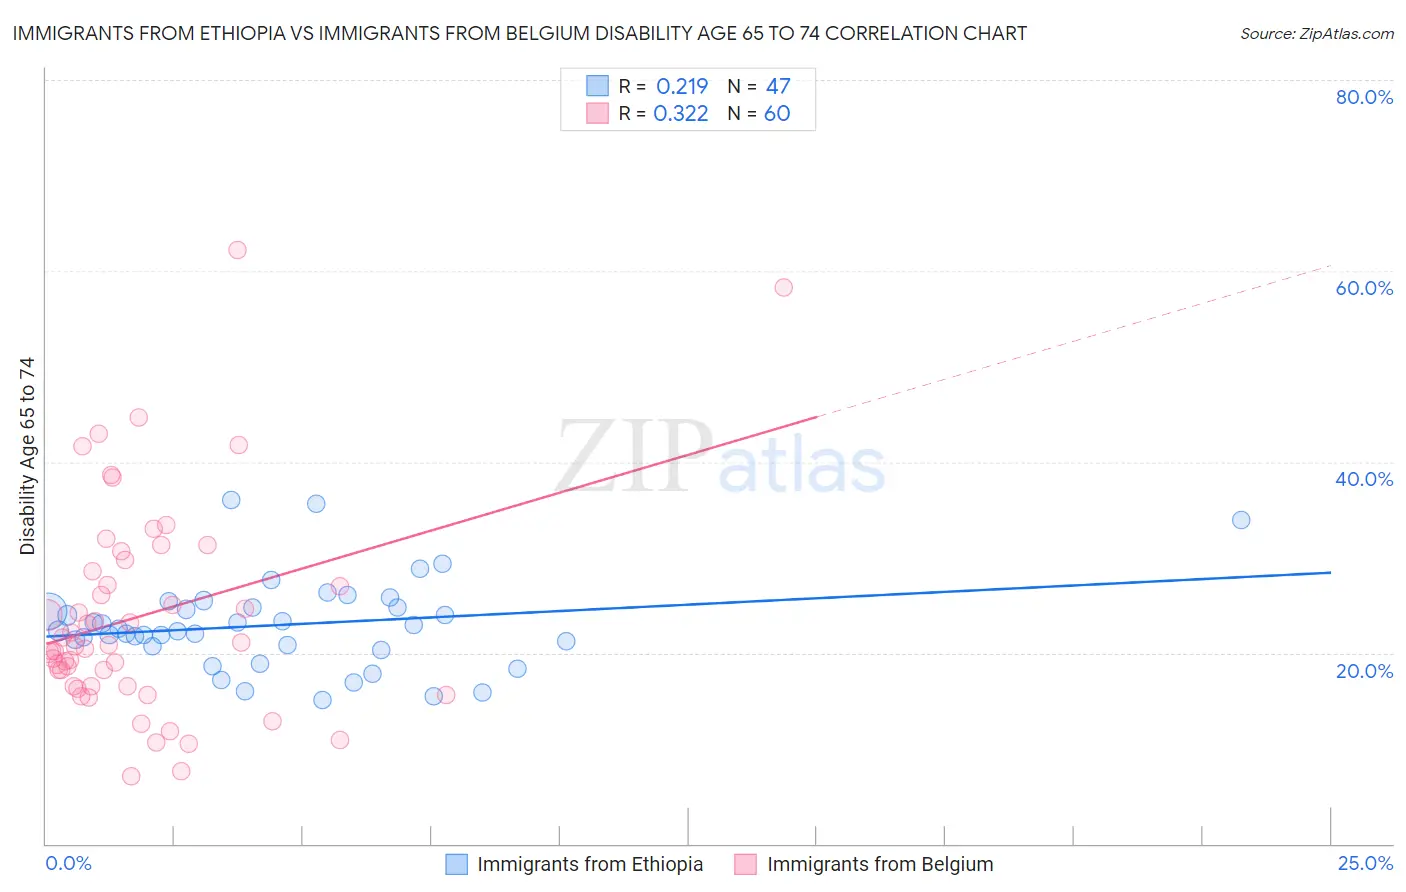 Immigrants from Ethiopia vs Immigrants from Belgium Disability Age 65 to 74